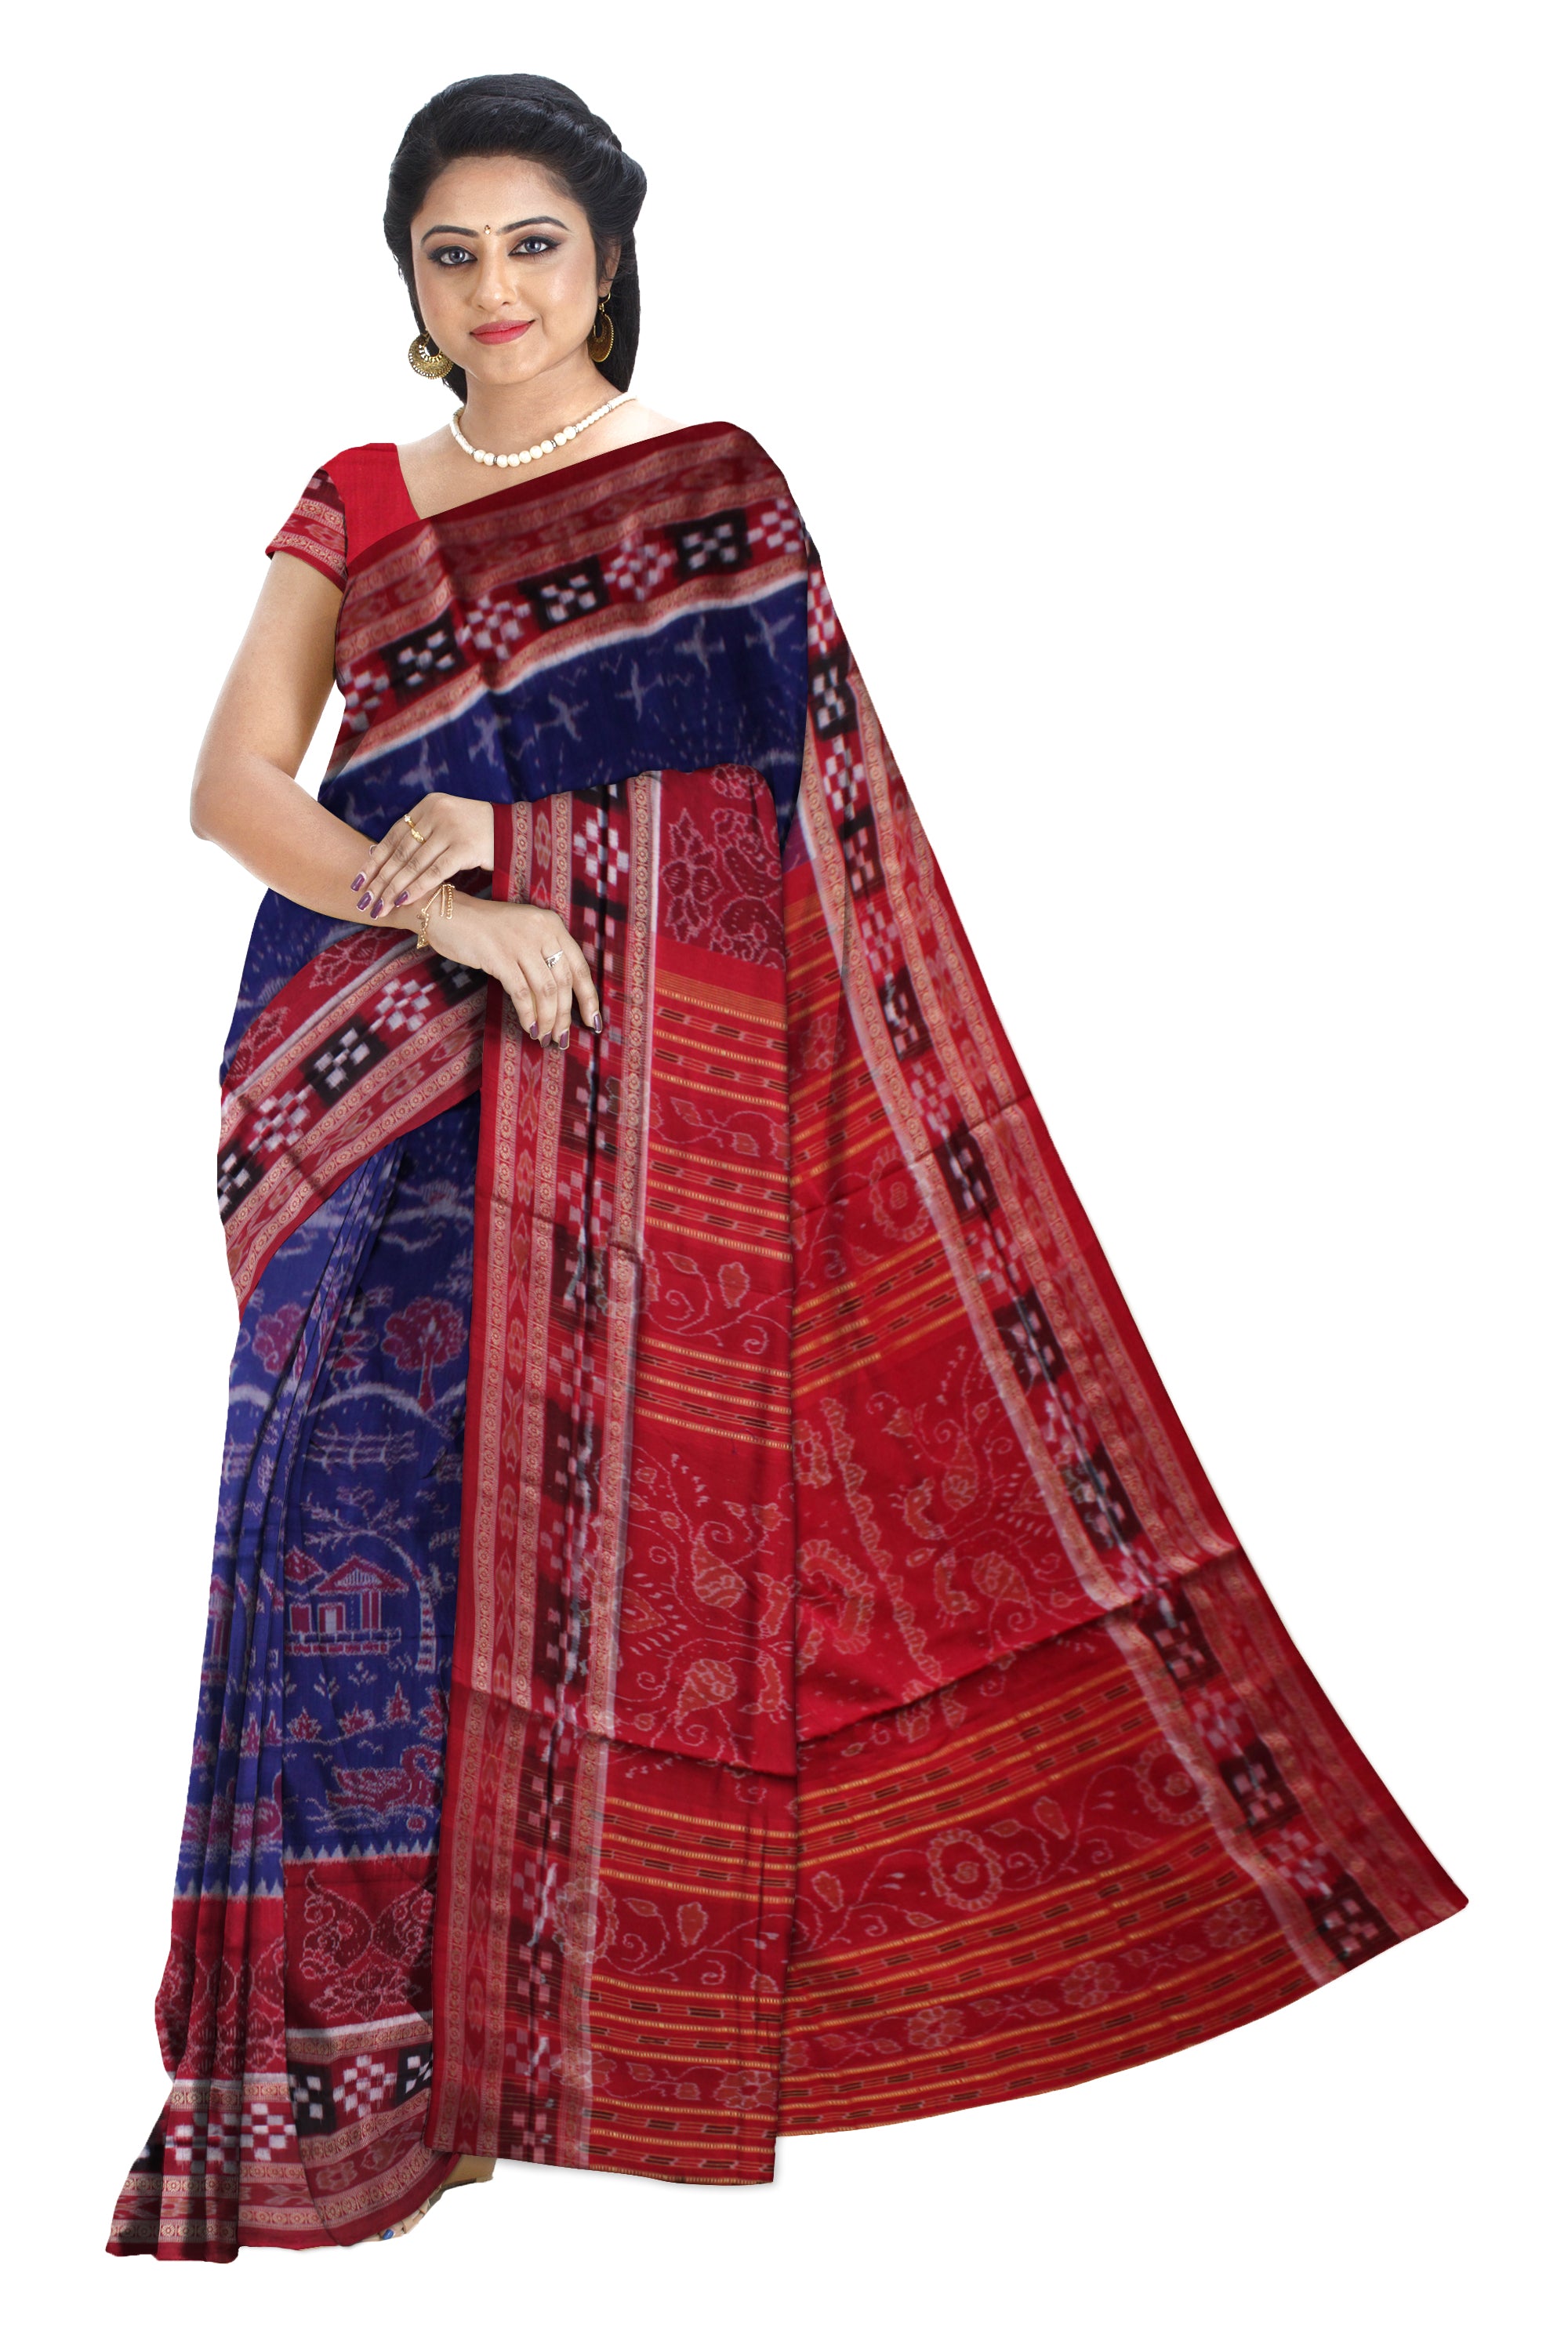 TRADITIONAL VILLAGE WITH SHANKHA PATTERN PURE COTTON SAREE IS BLUE AND RED COLOR BASE,WITH BLOUSE PIECE. - Koshali Arts & Crafts Enterprise